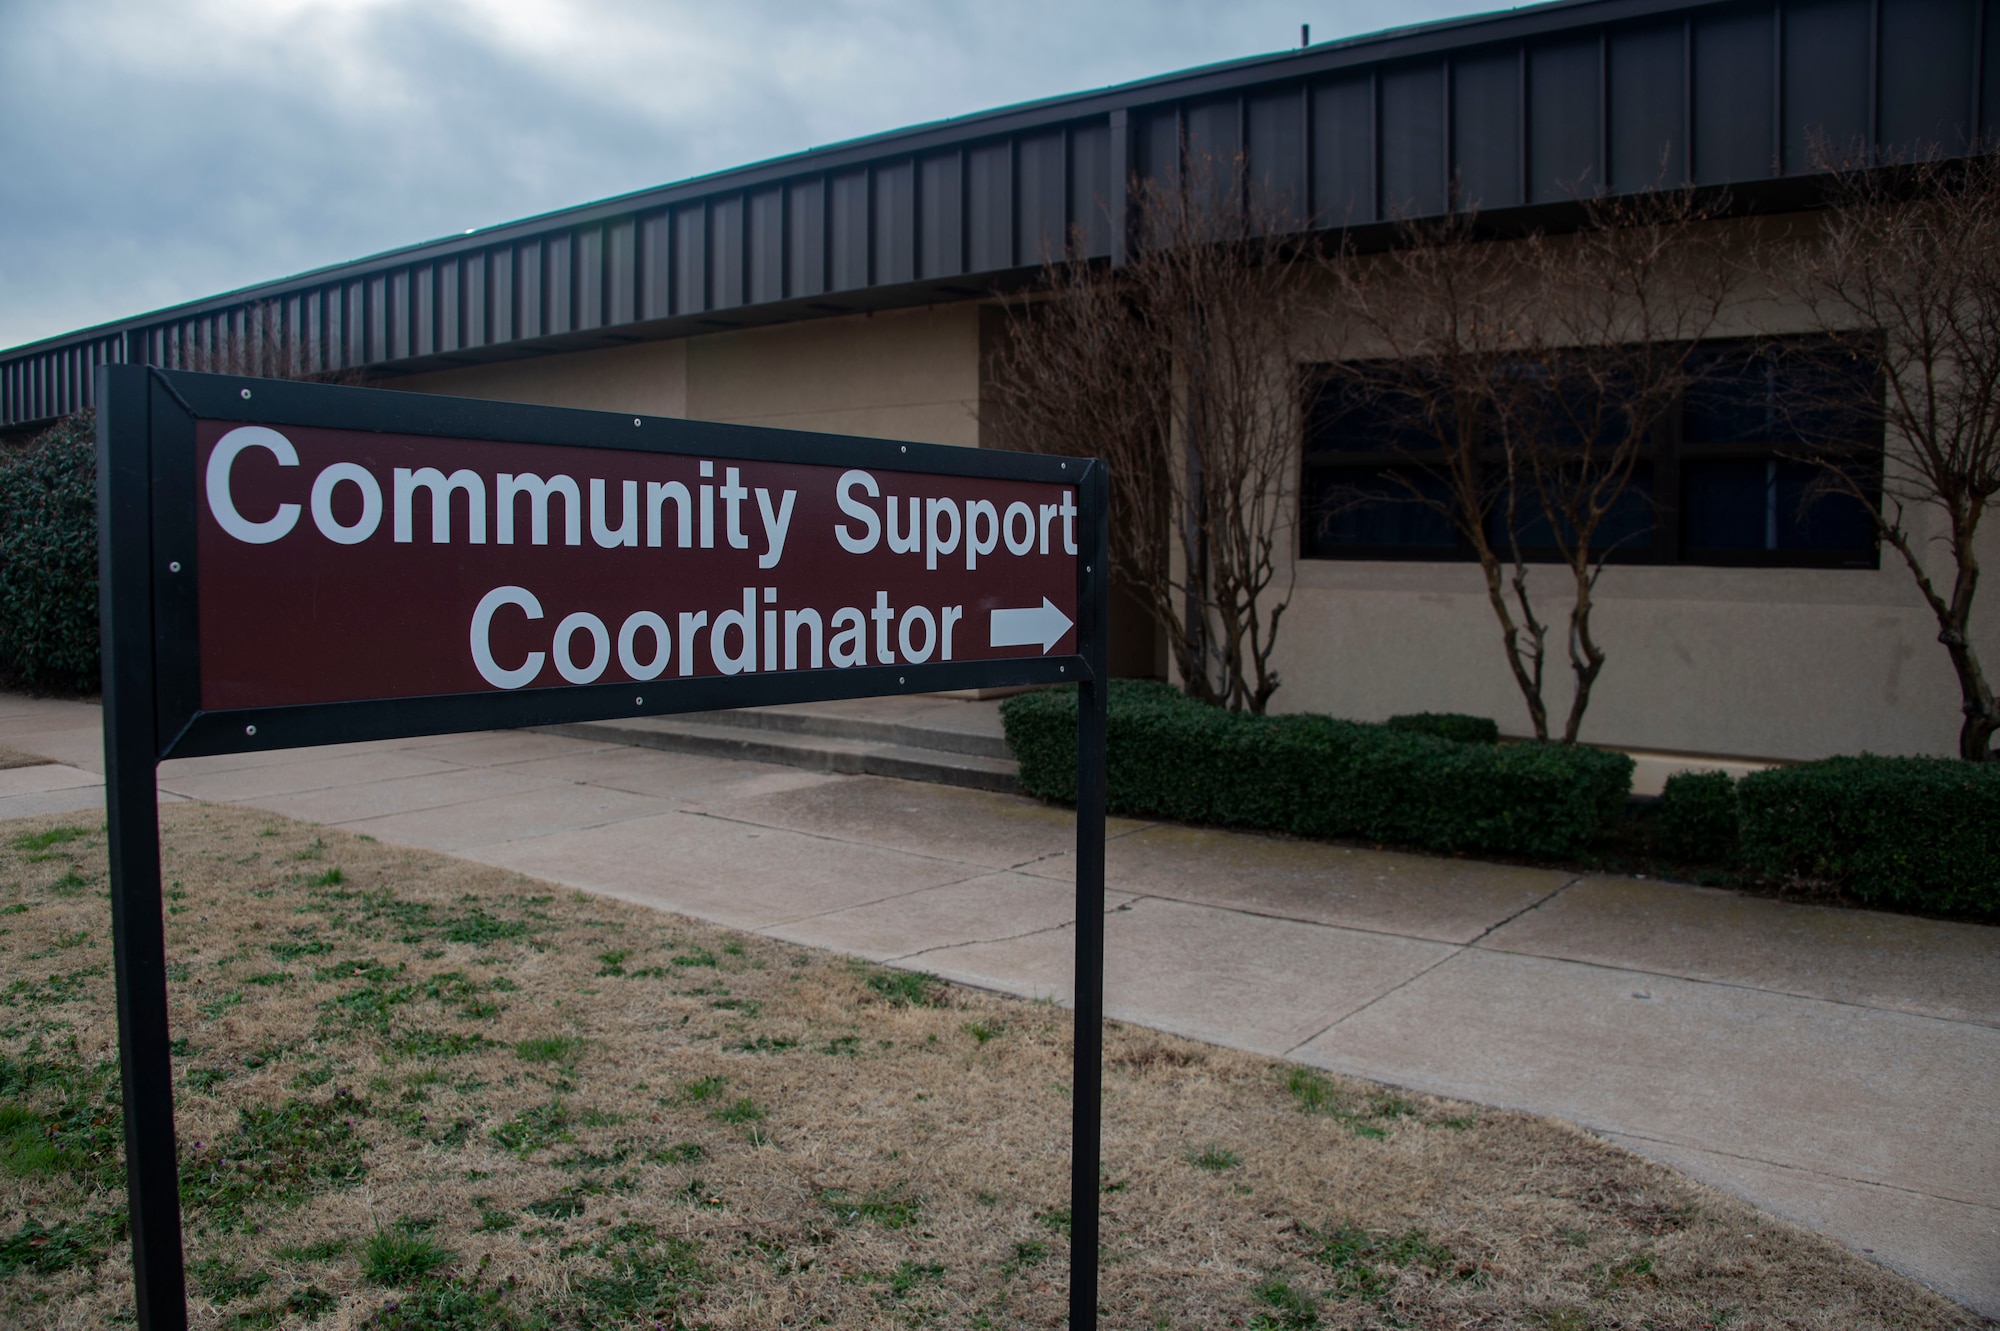 The community support coordinator sign points to the Airmen Resiliency Center